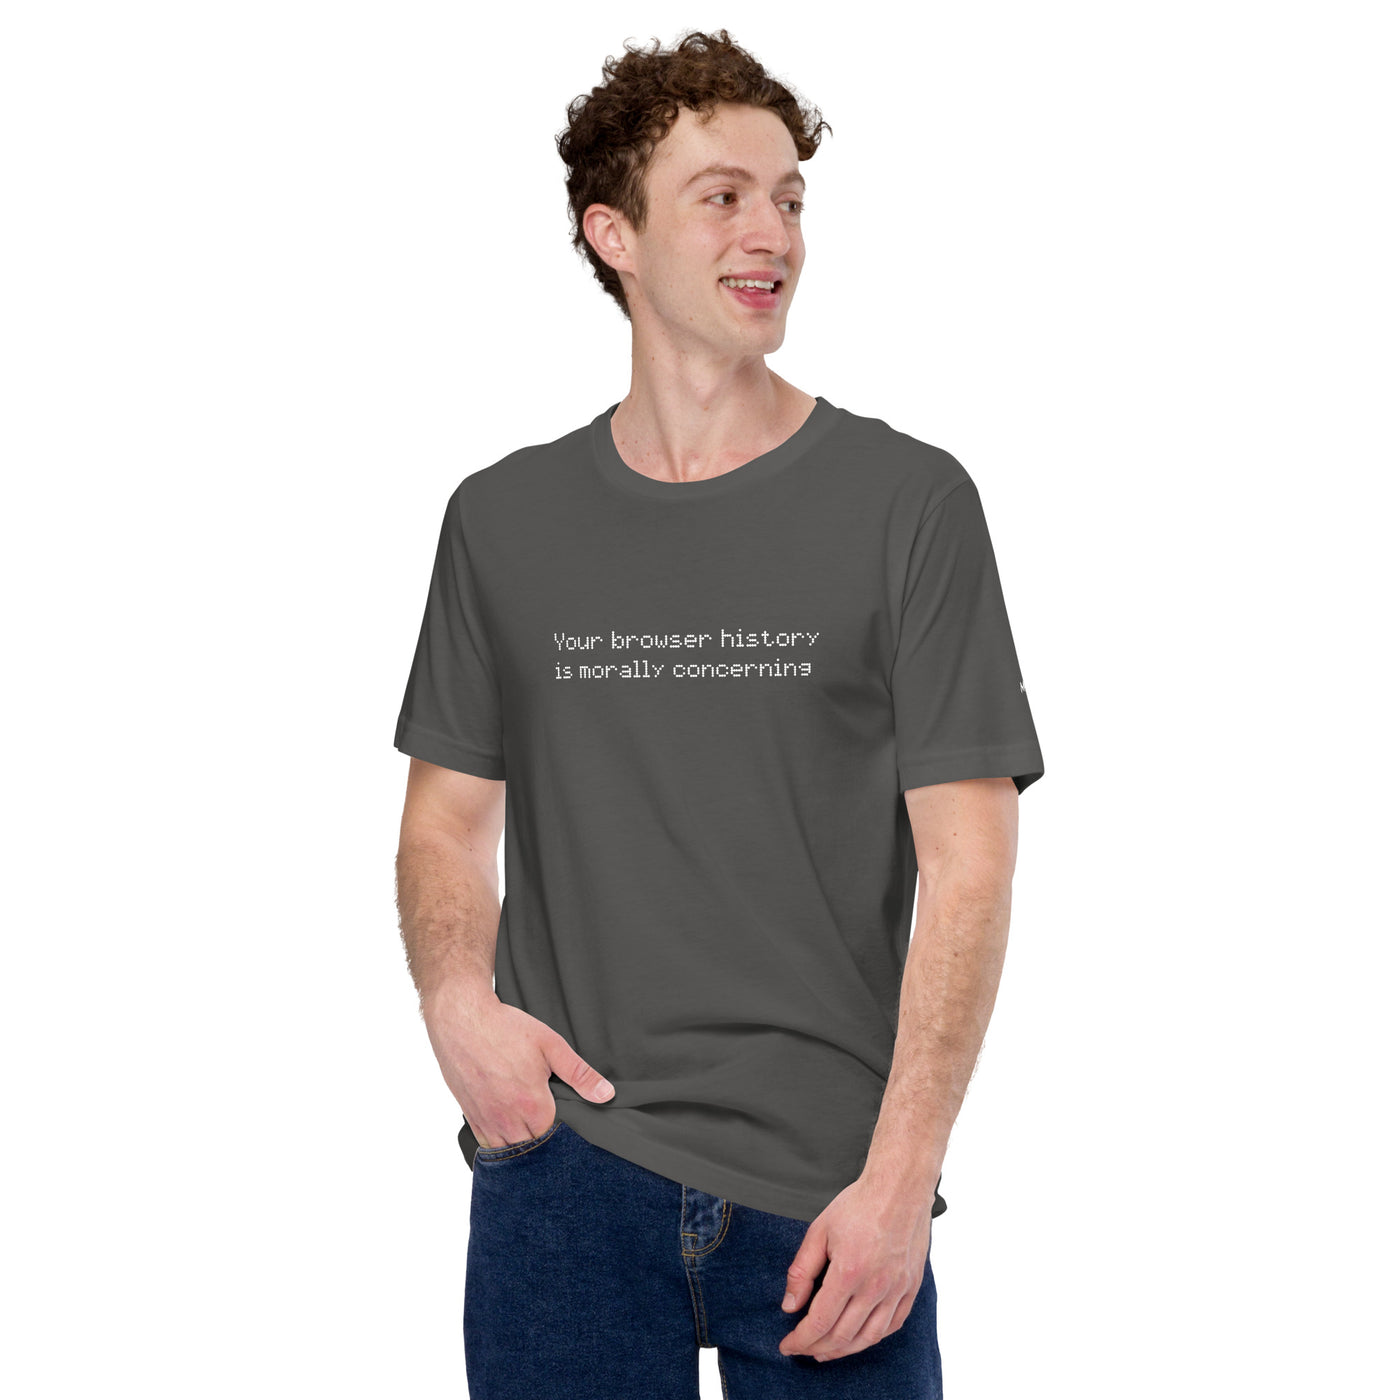 Your Browser History is Morally Concerning  V2 Unisex t-shirt